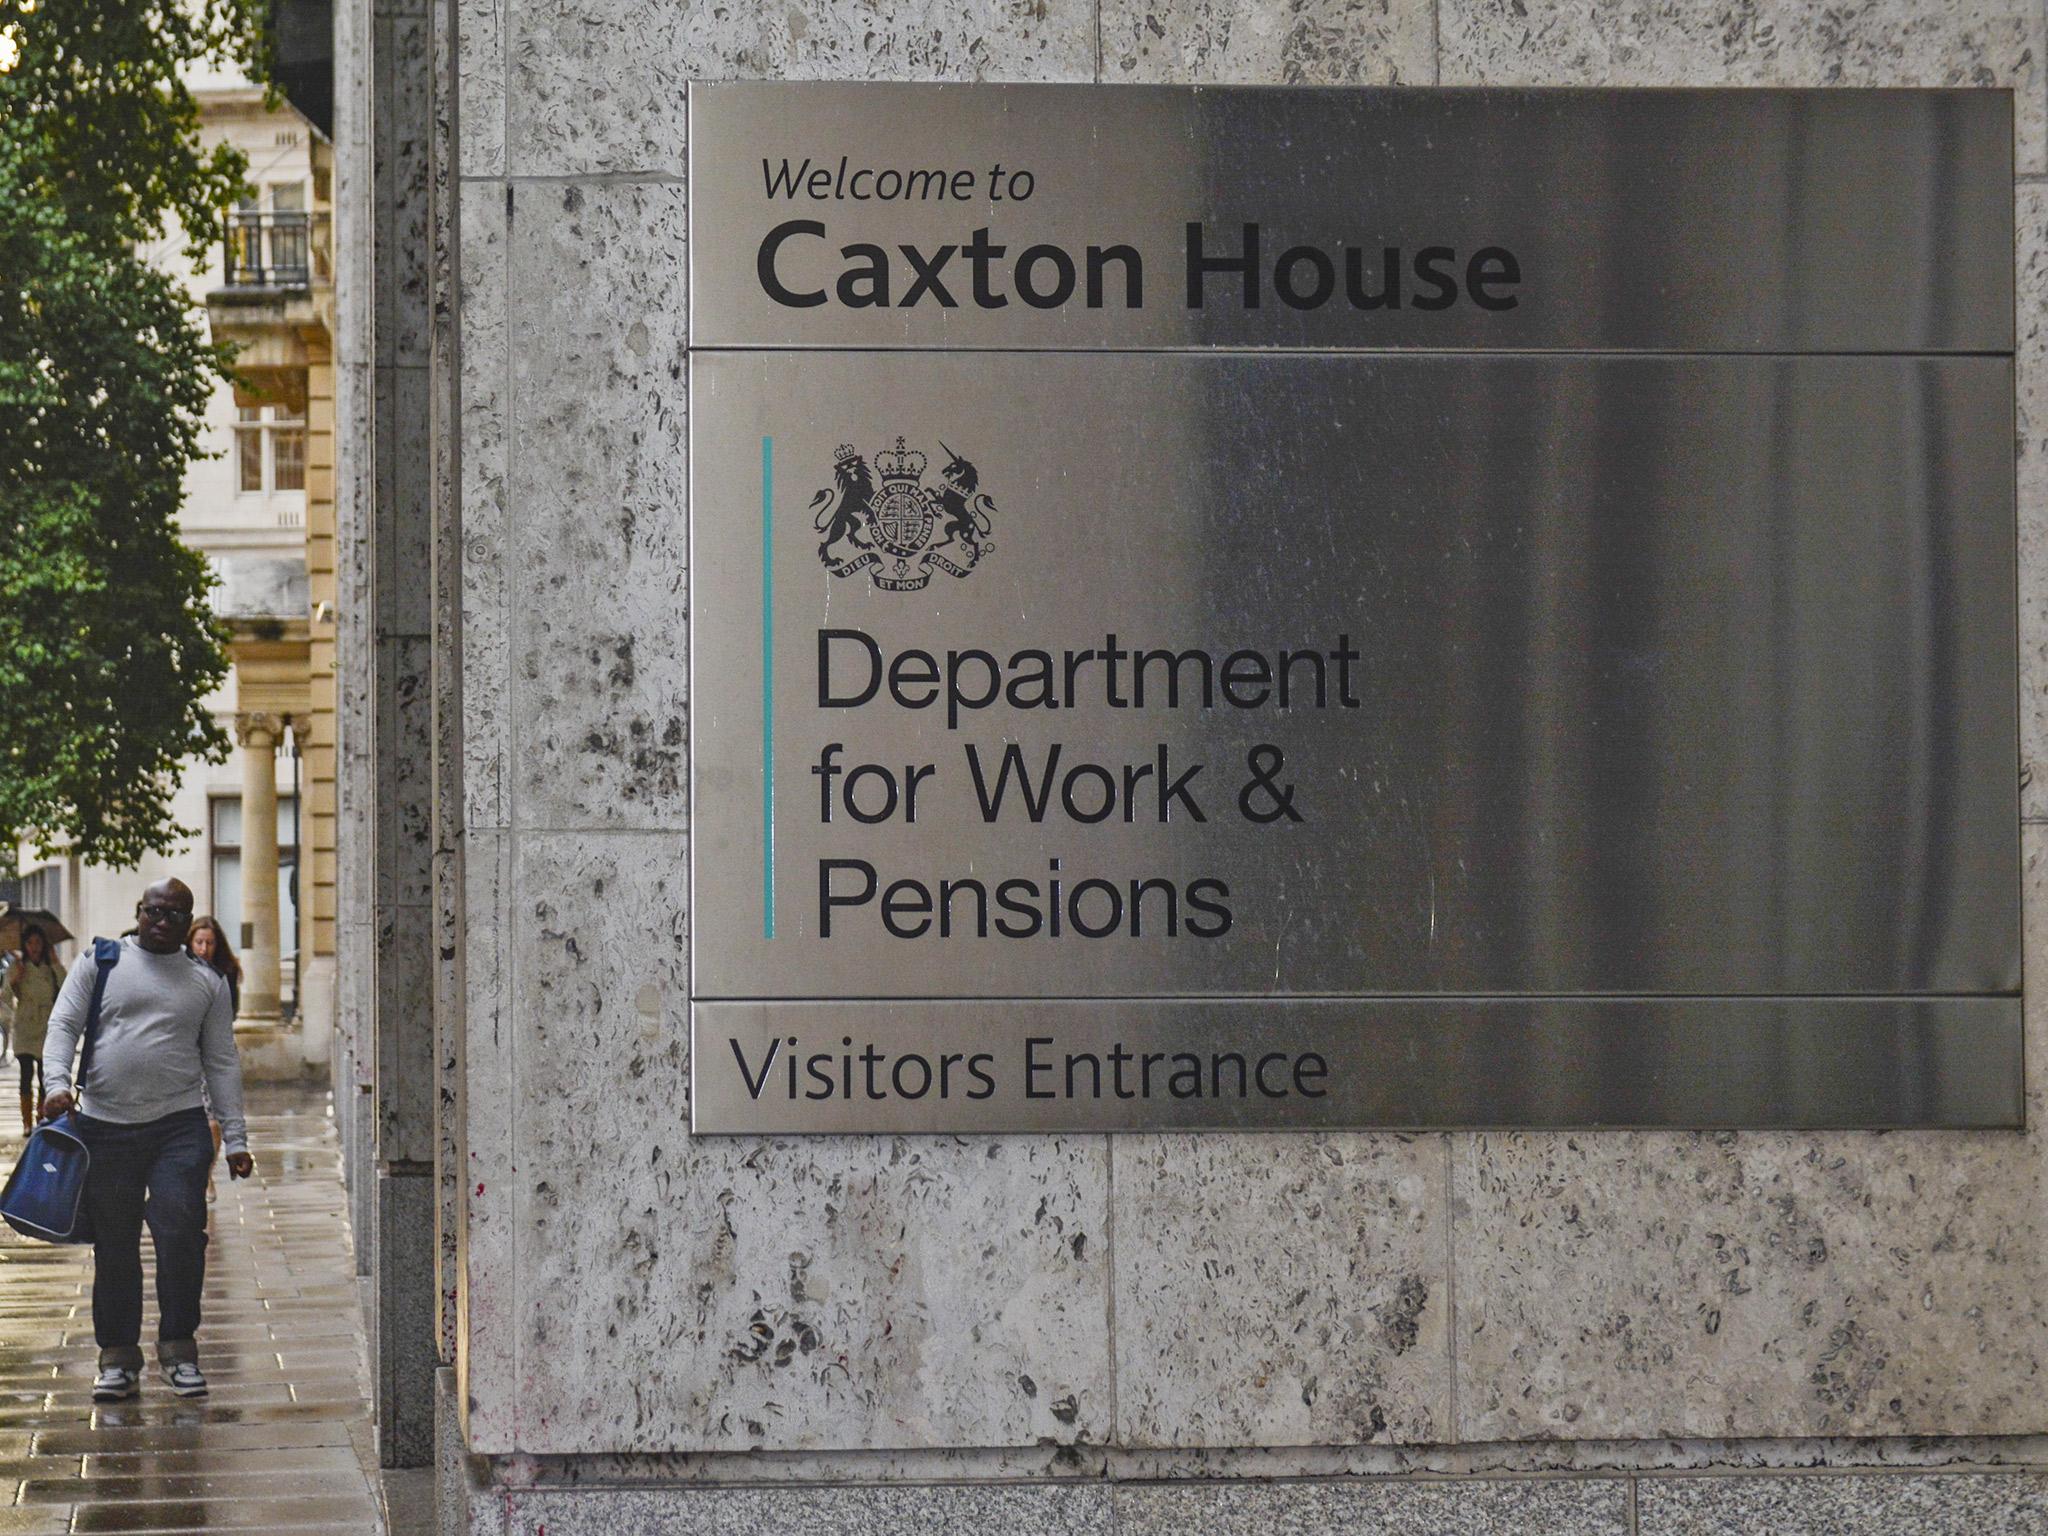 The DWP has forced rent payment reductions on some supported housing